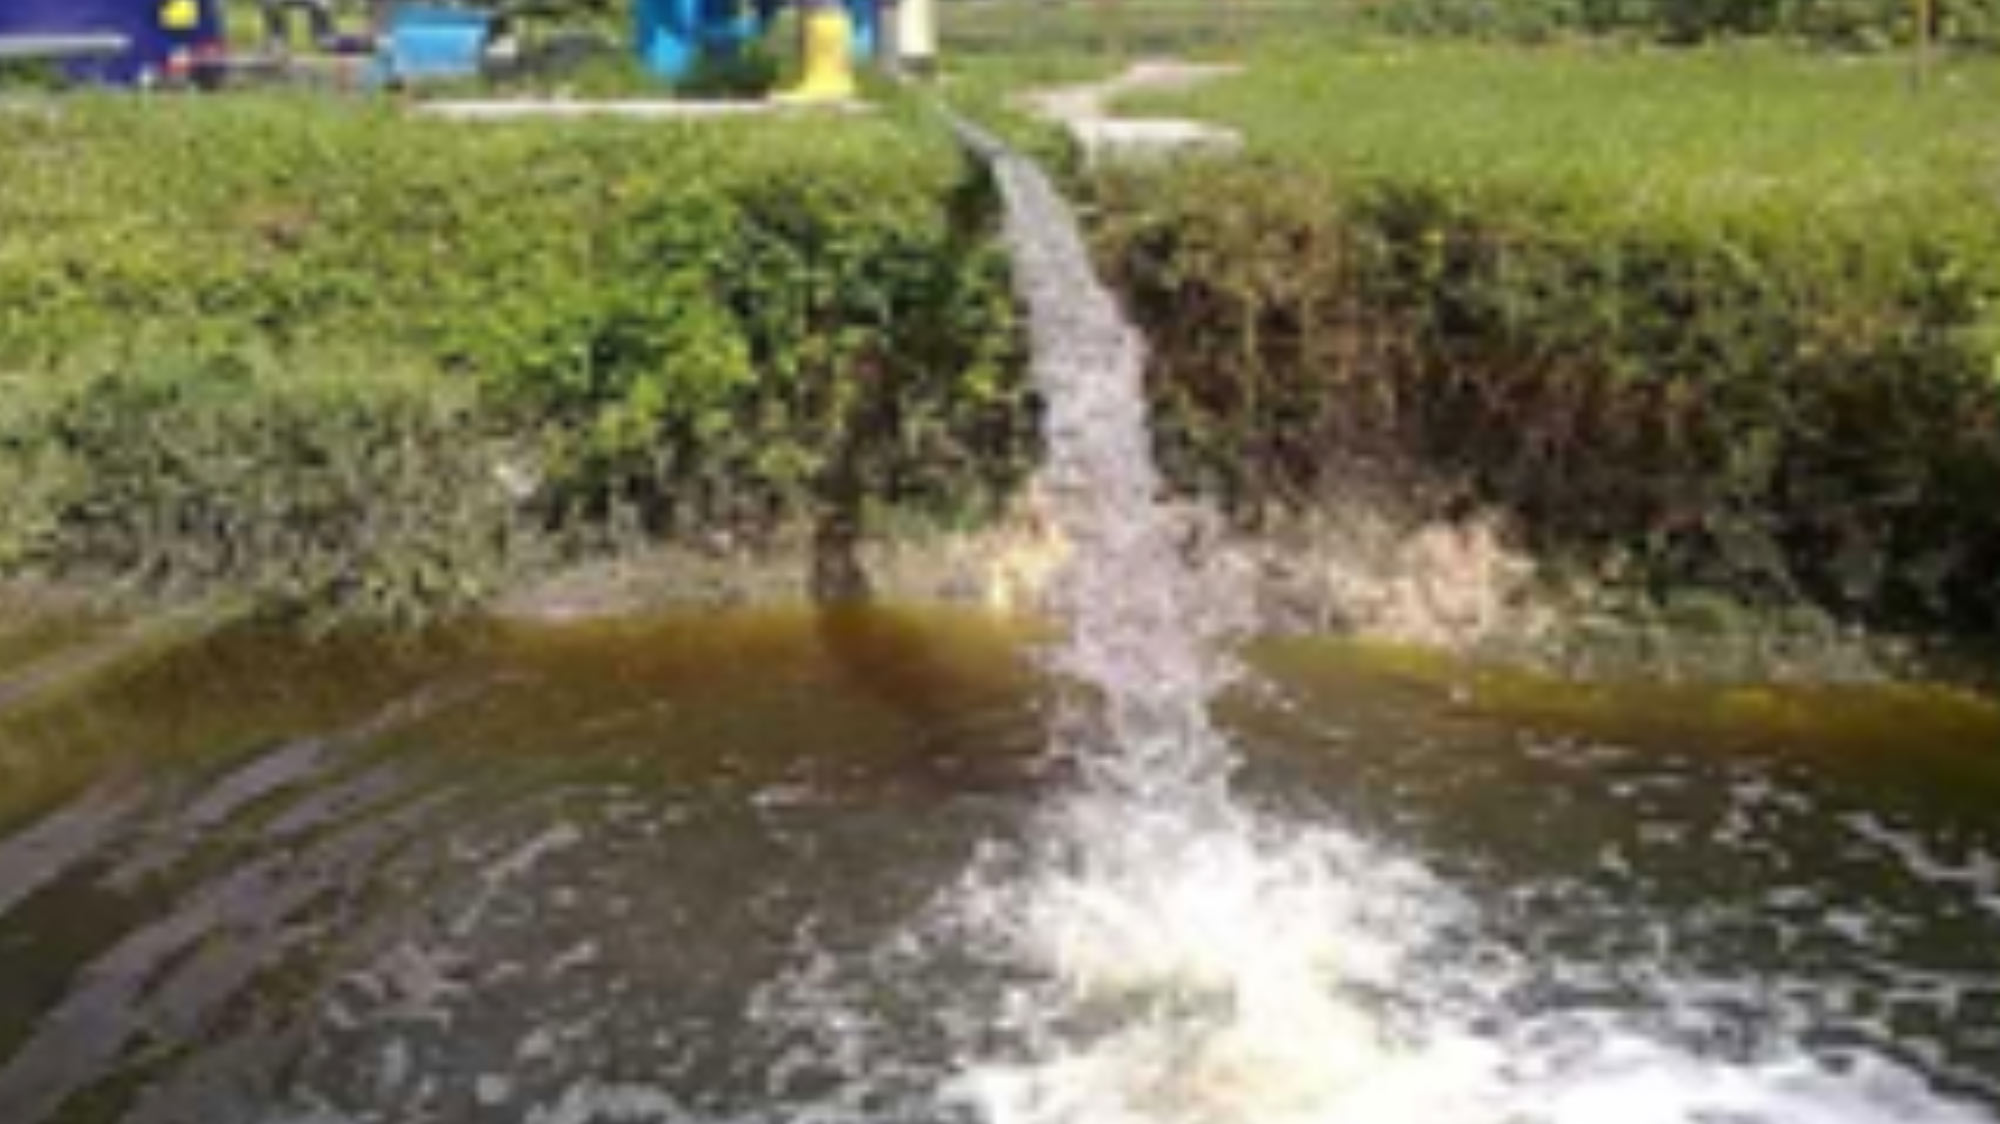 Treatment of Palm Oil Mill Effluent (POME)